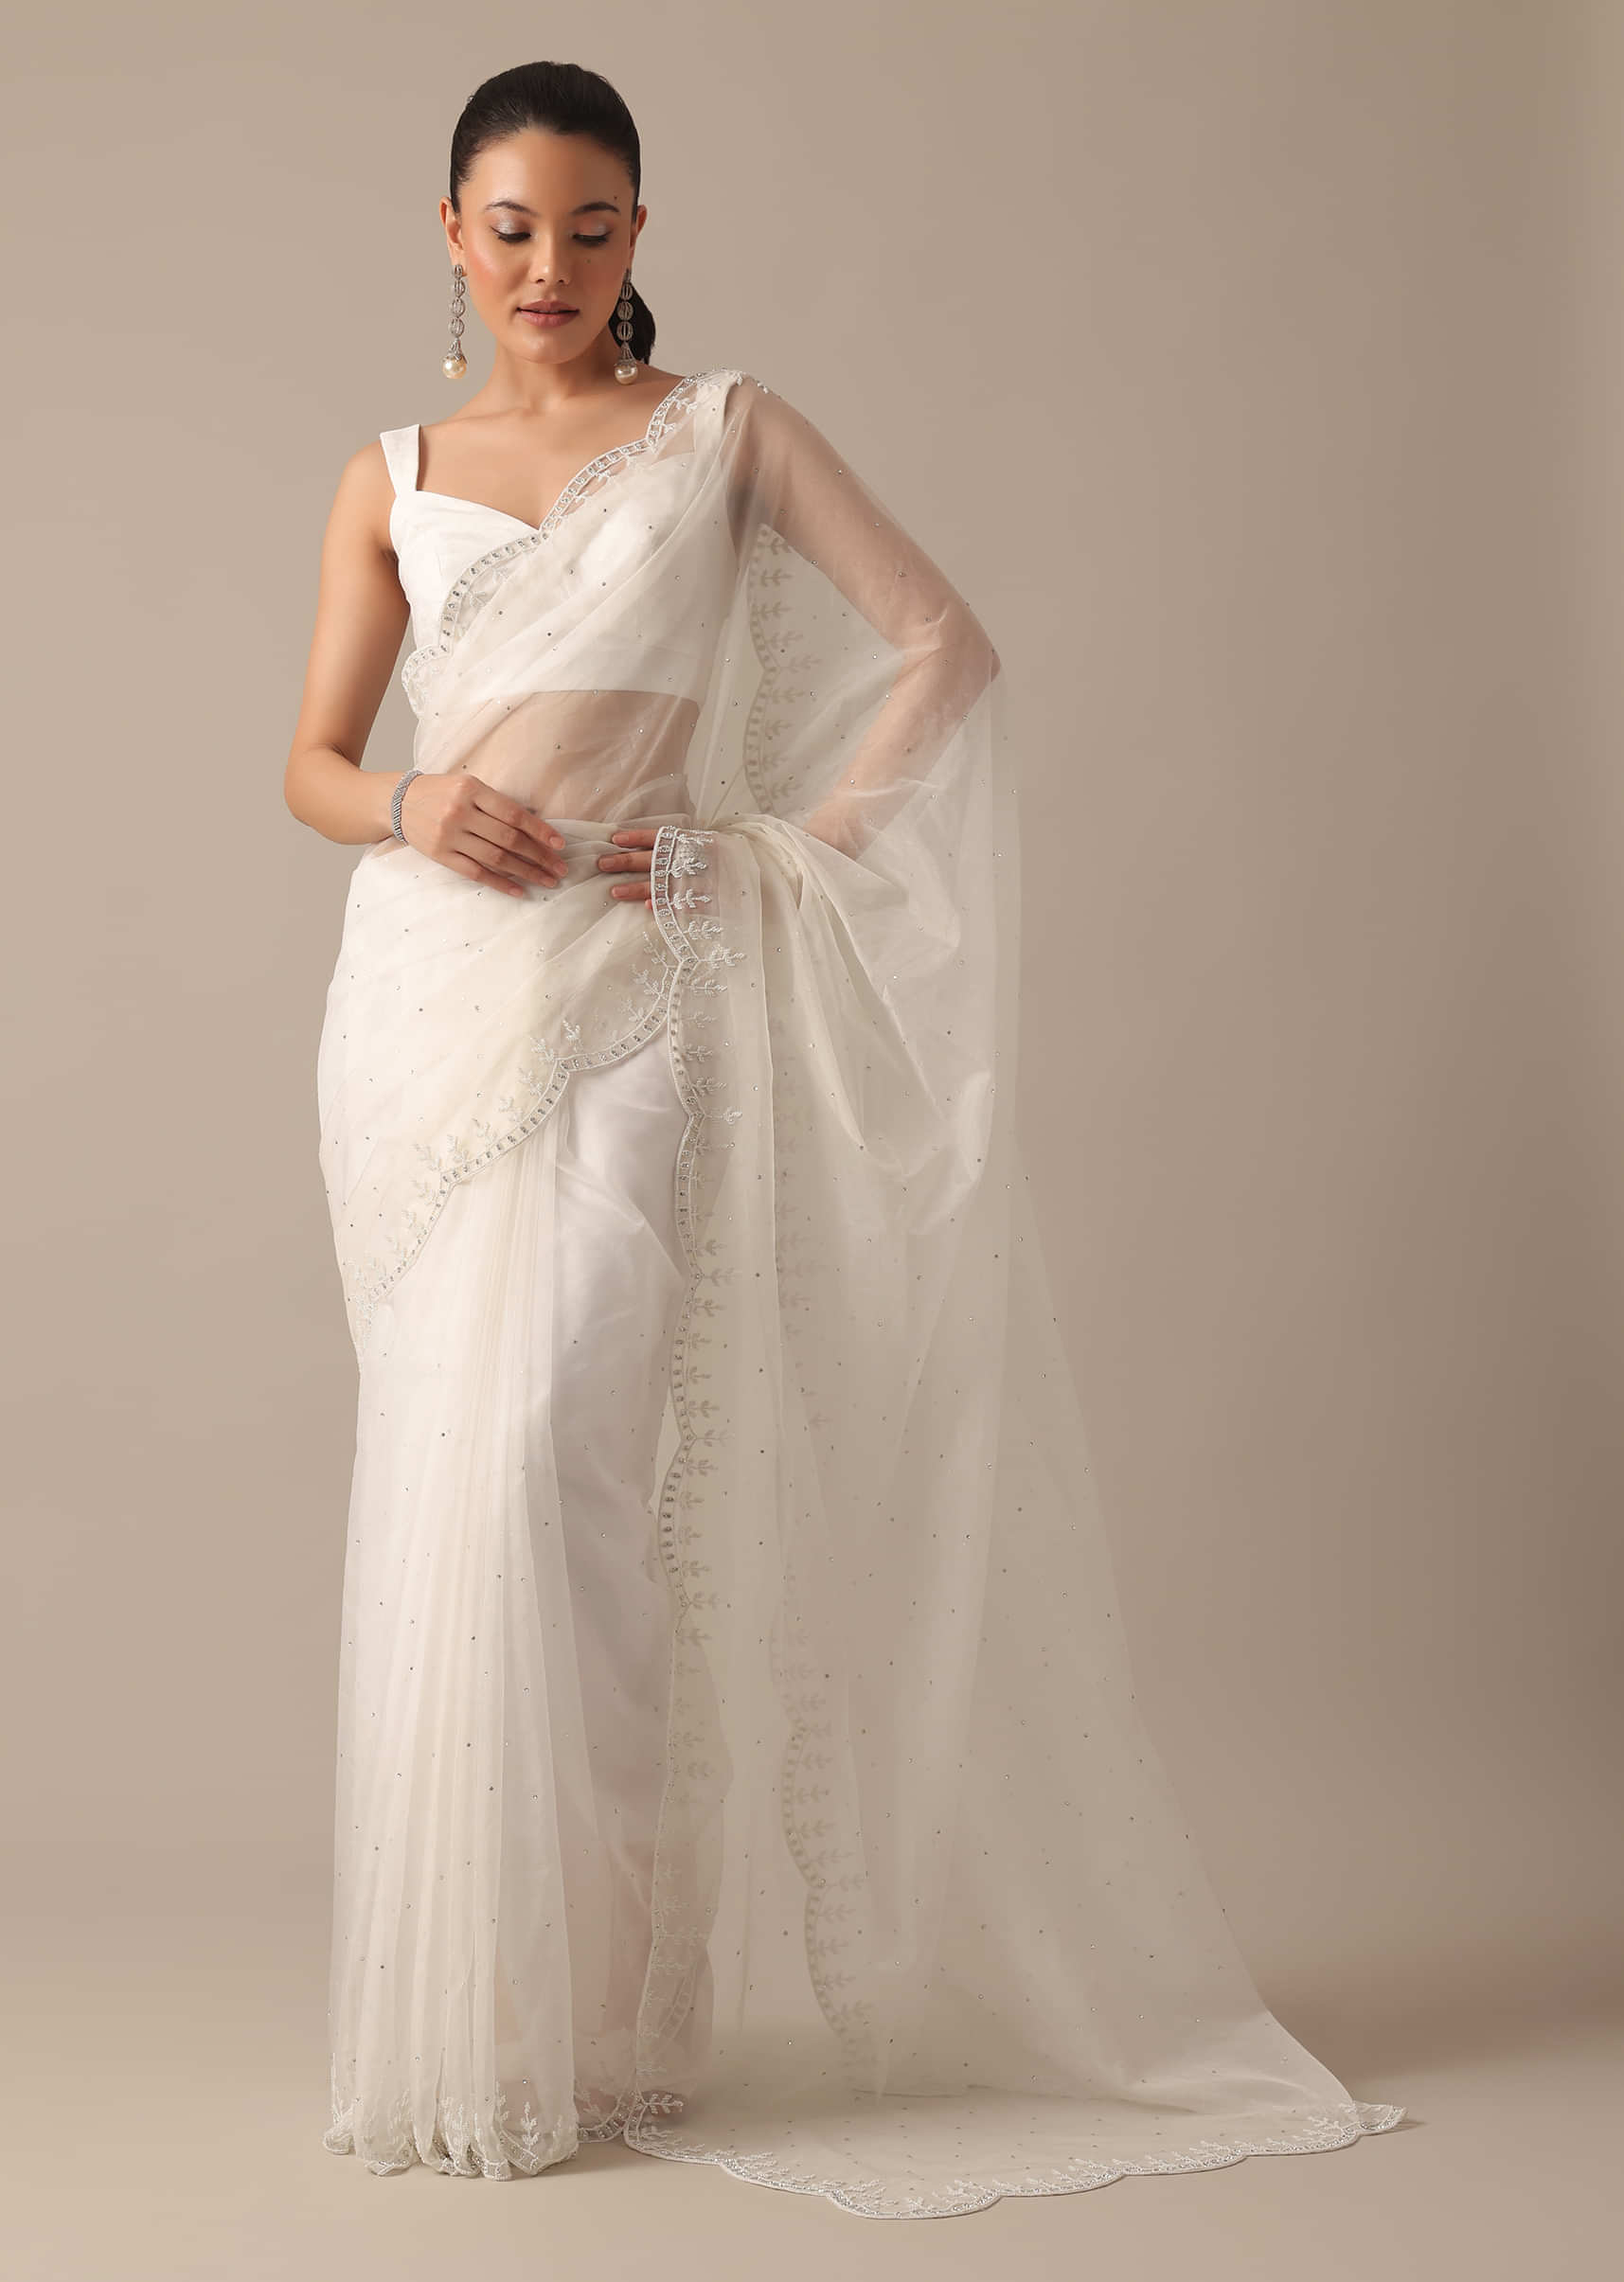 Designer Party Gowns | Evening, Casual, Indo Western & Saree Gowns for  Women | Seasons India